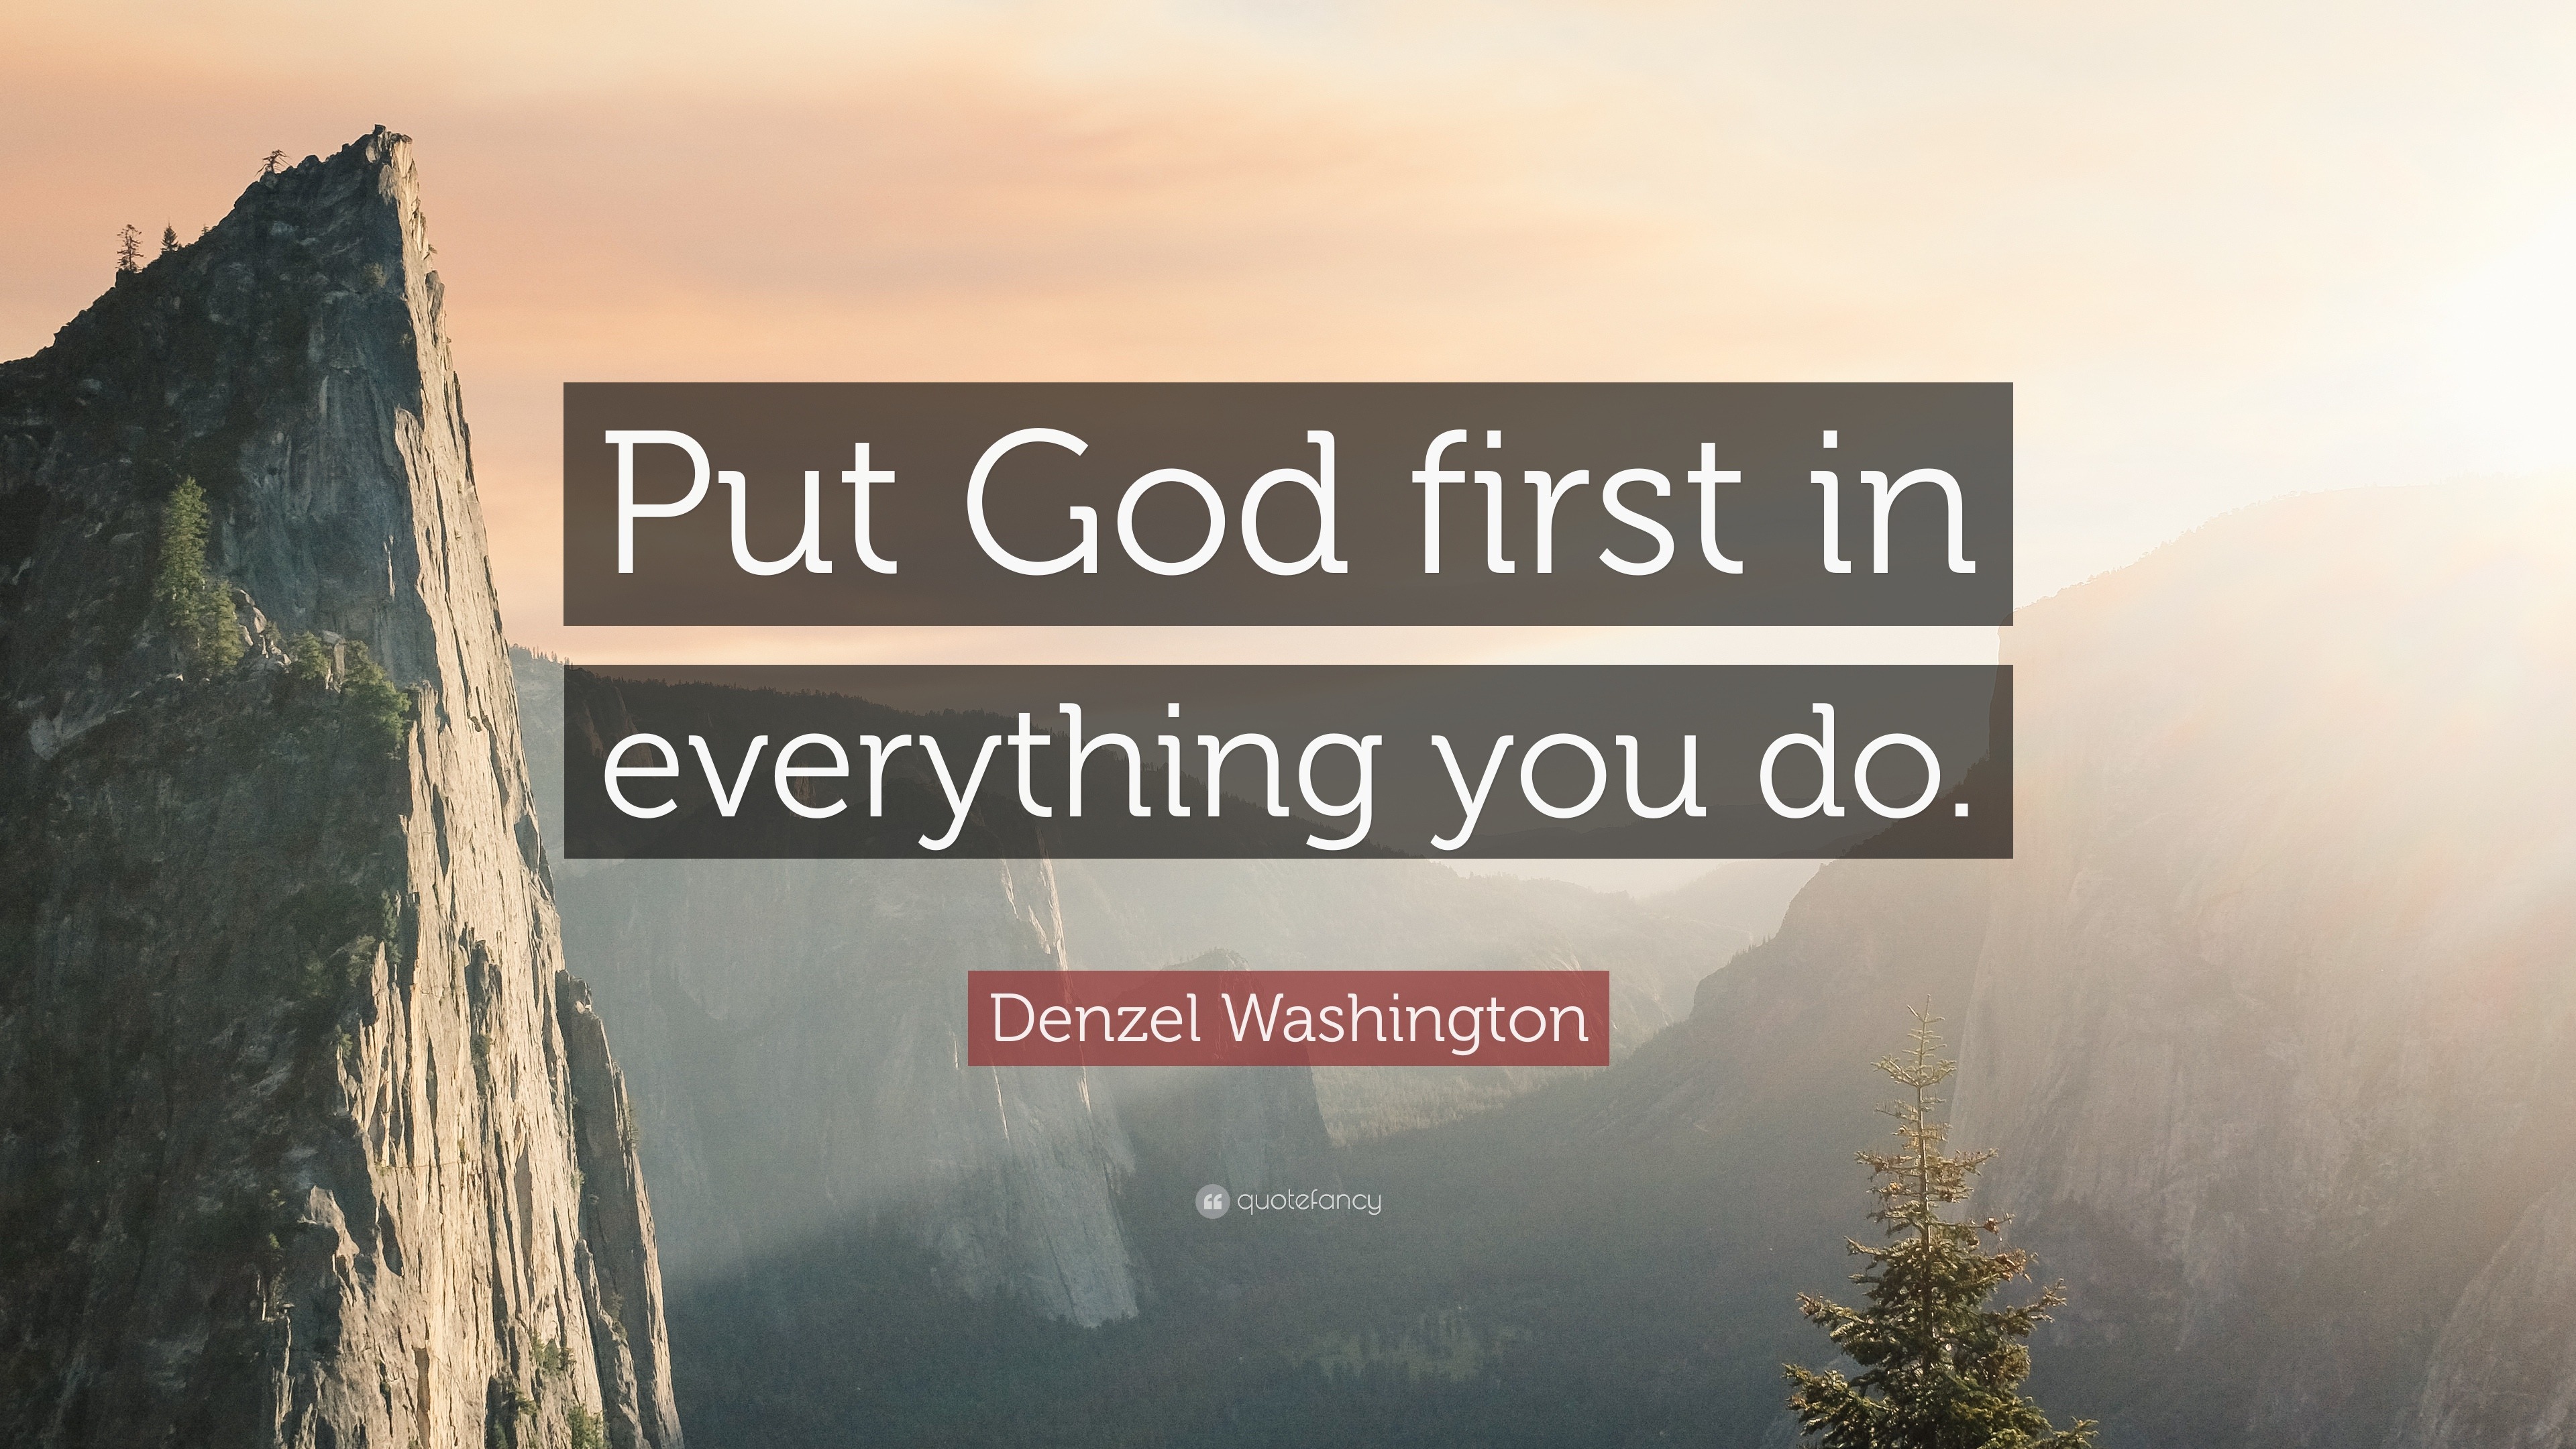 Denzel Washington Quote “put God First In Everything You Do”